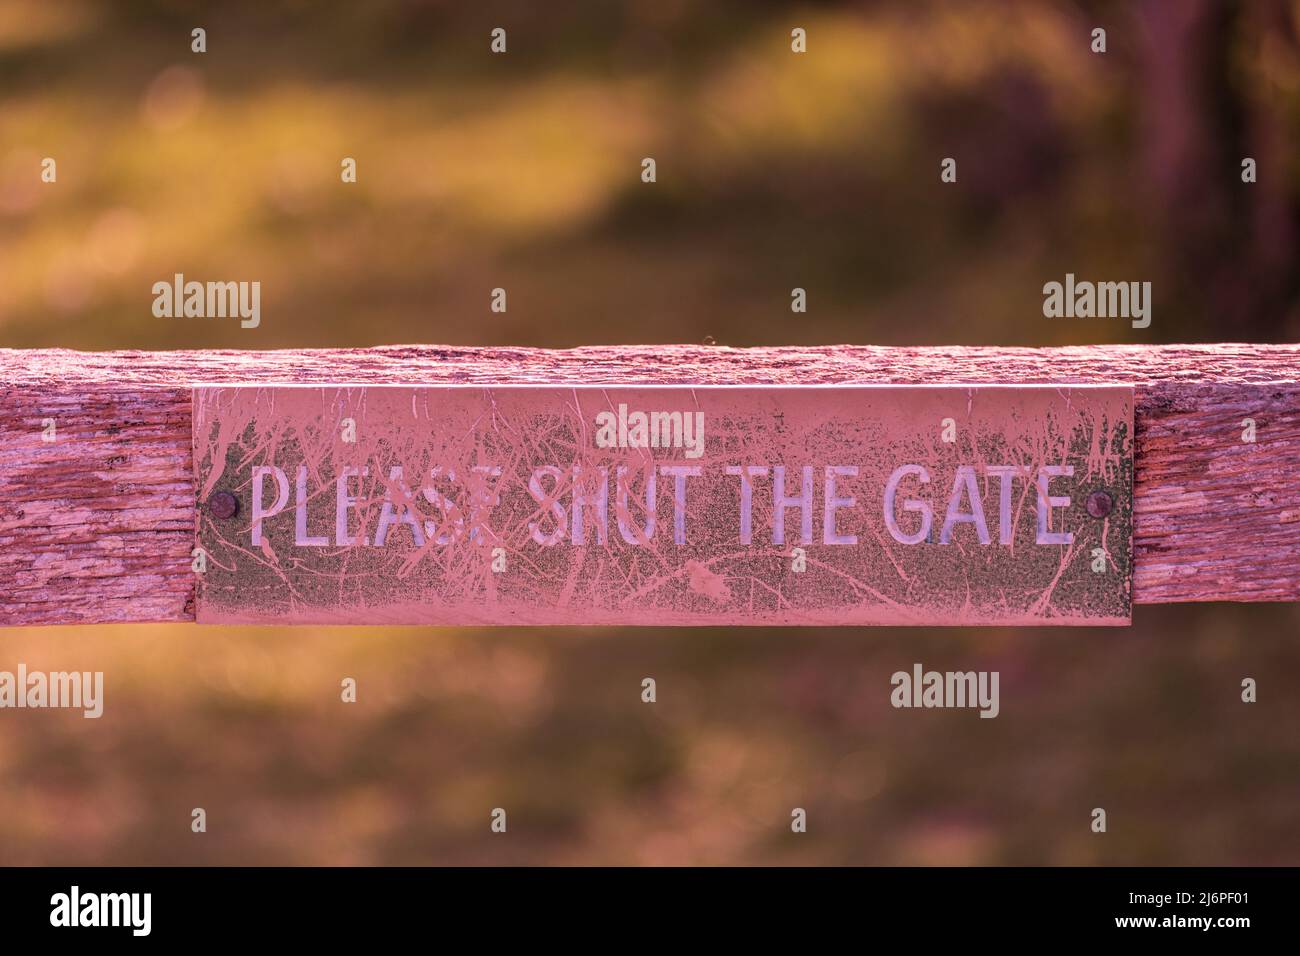 Please Shut The Gate sign on a gate to a farm field. Stock Photo